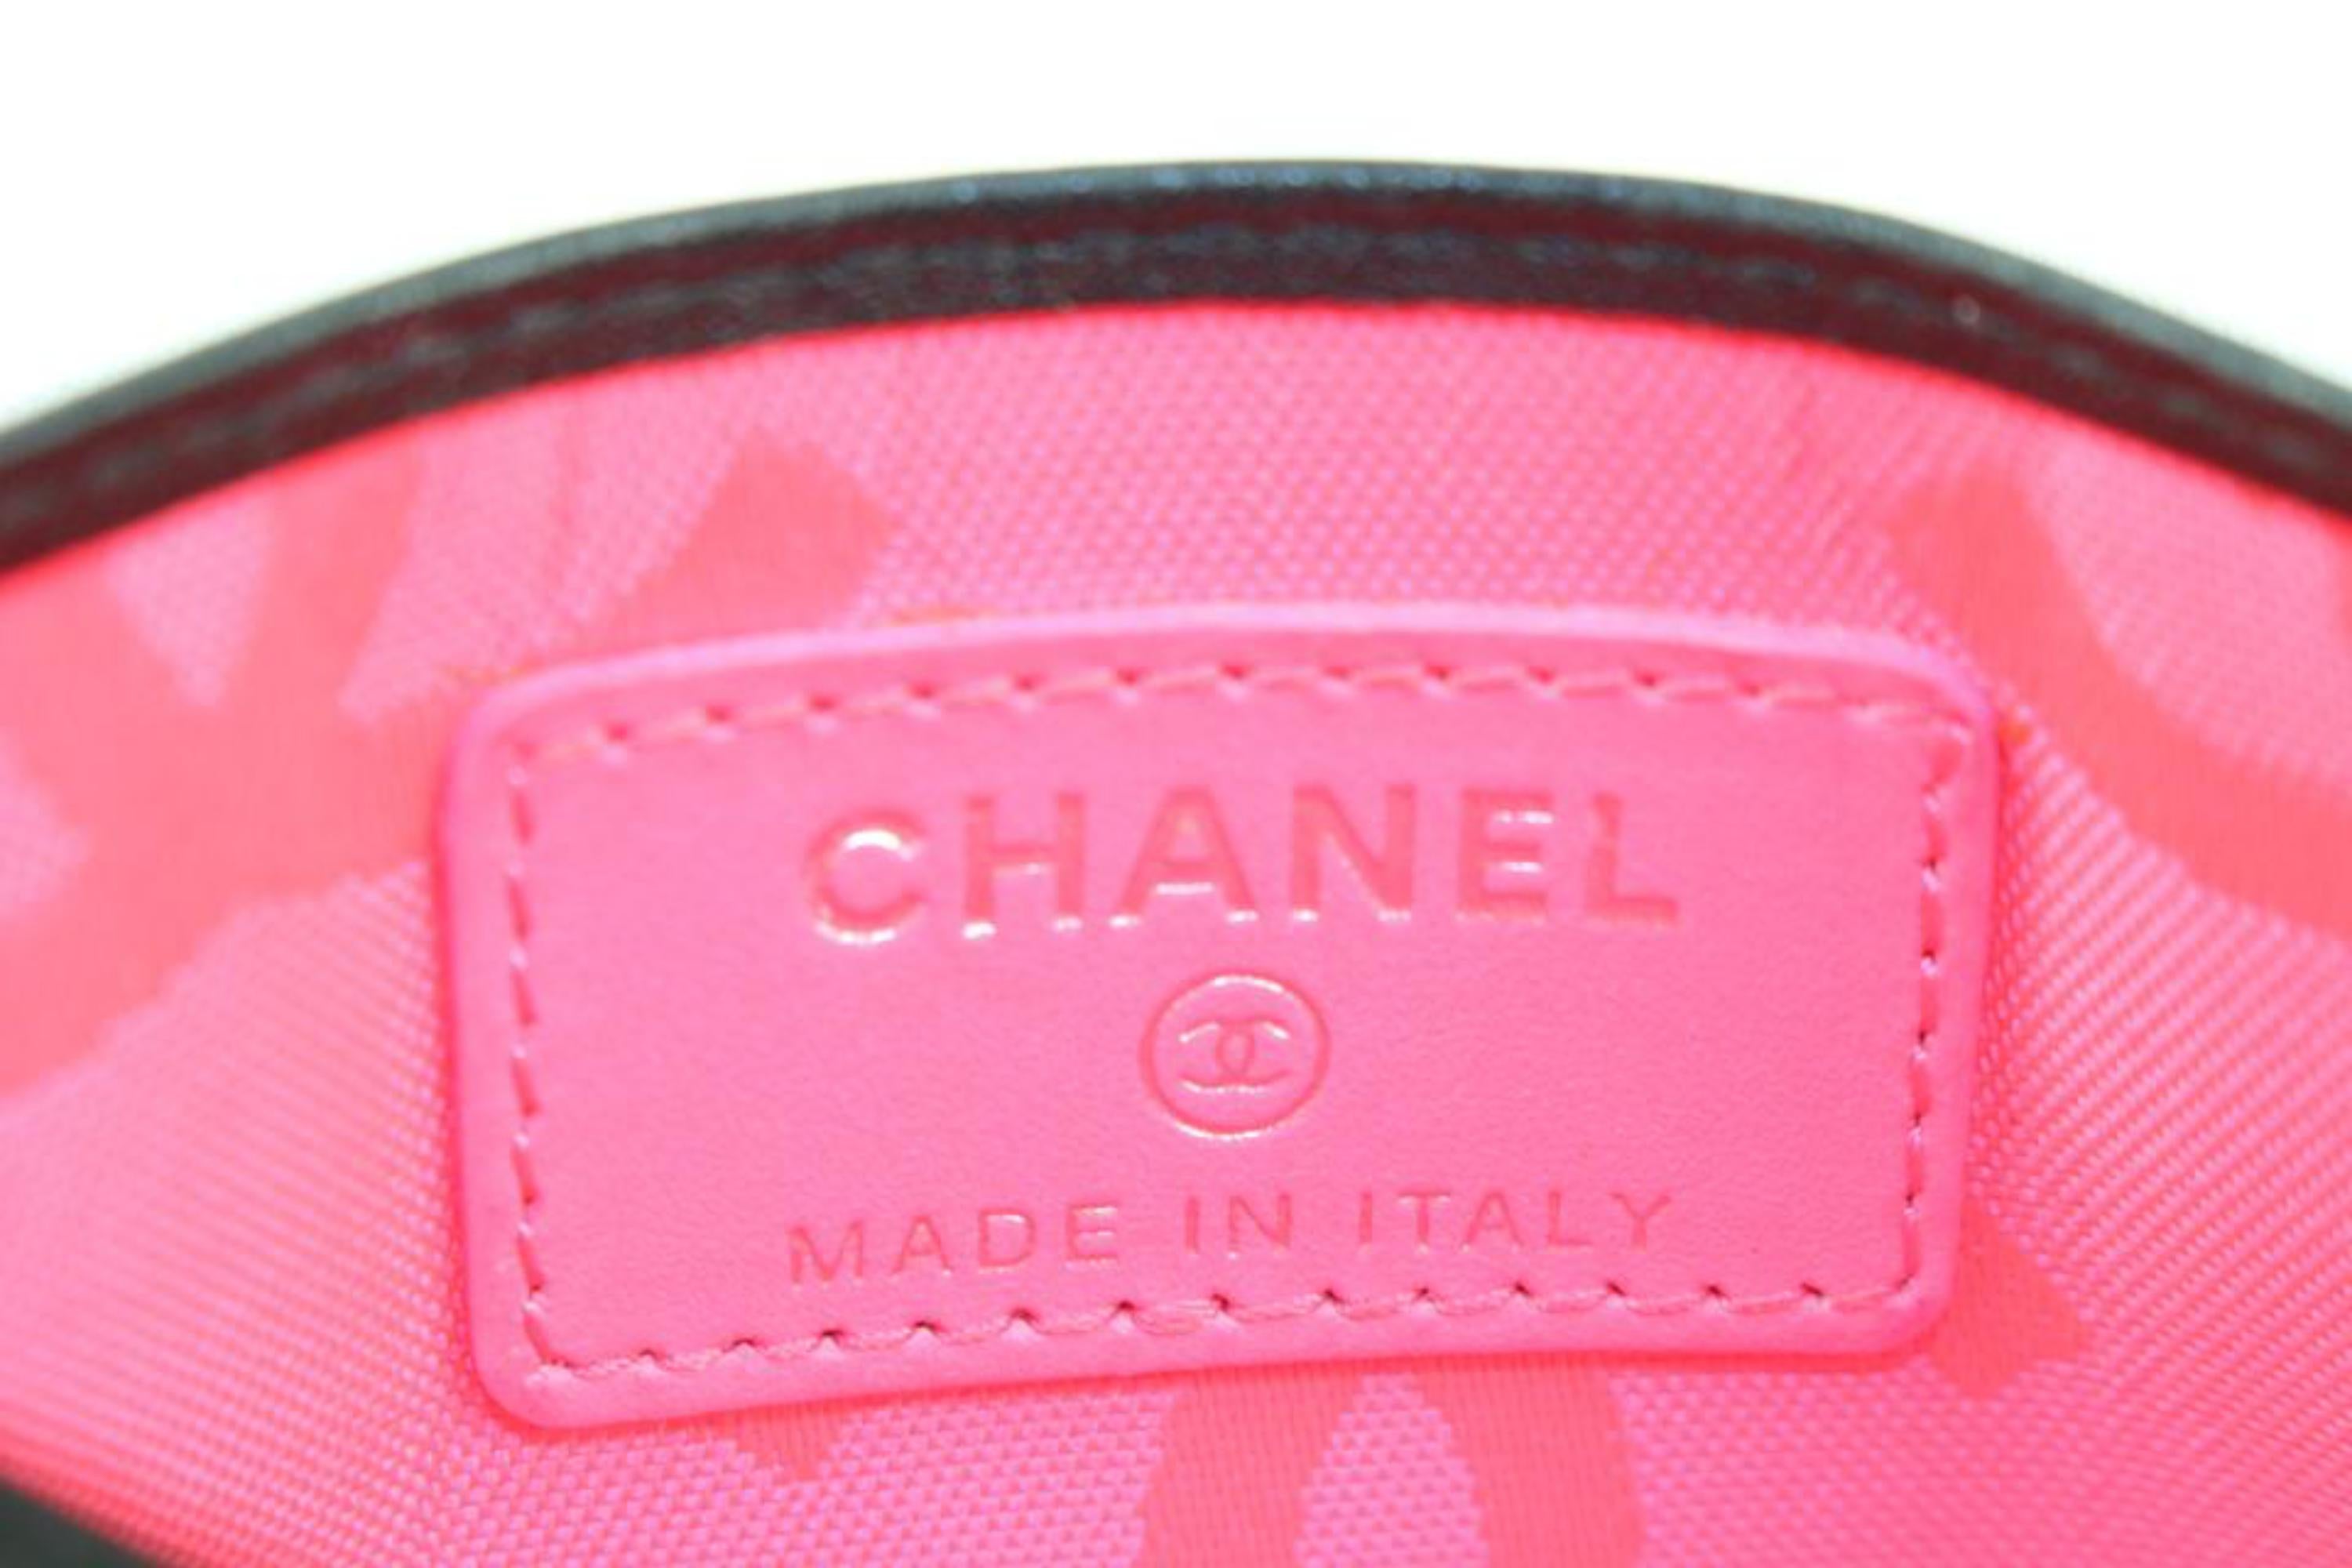 CHANEL PINK CAMBON QUILTED LEATHER BAG